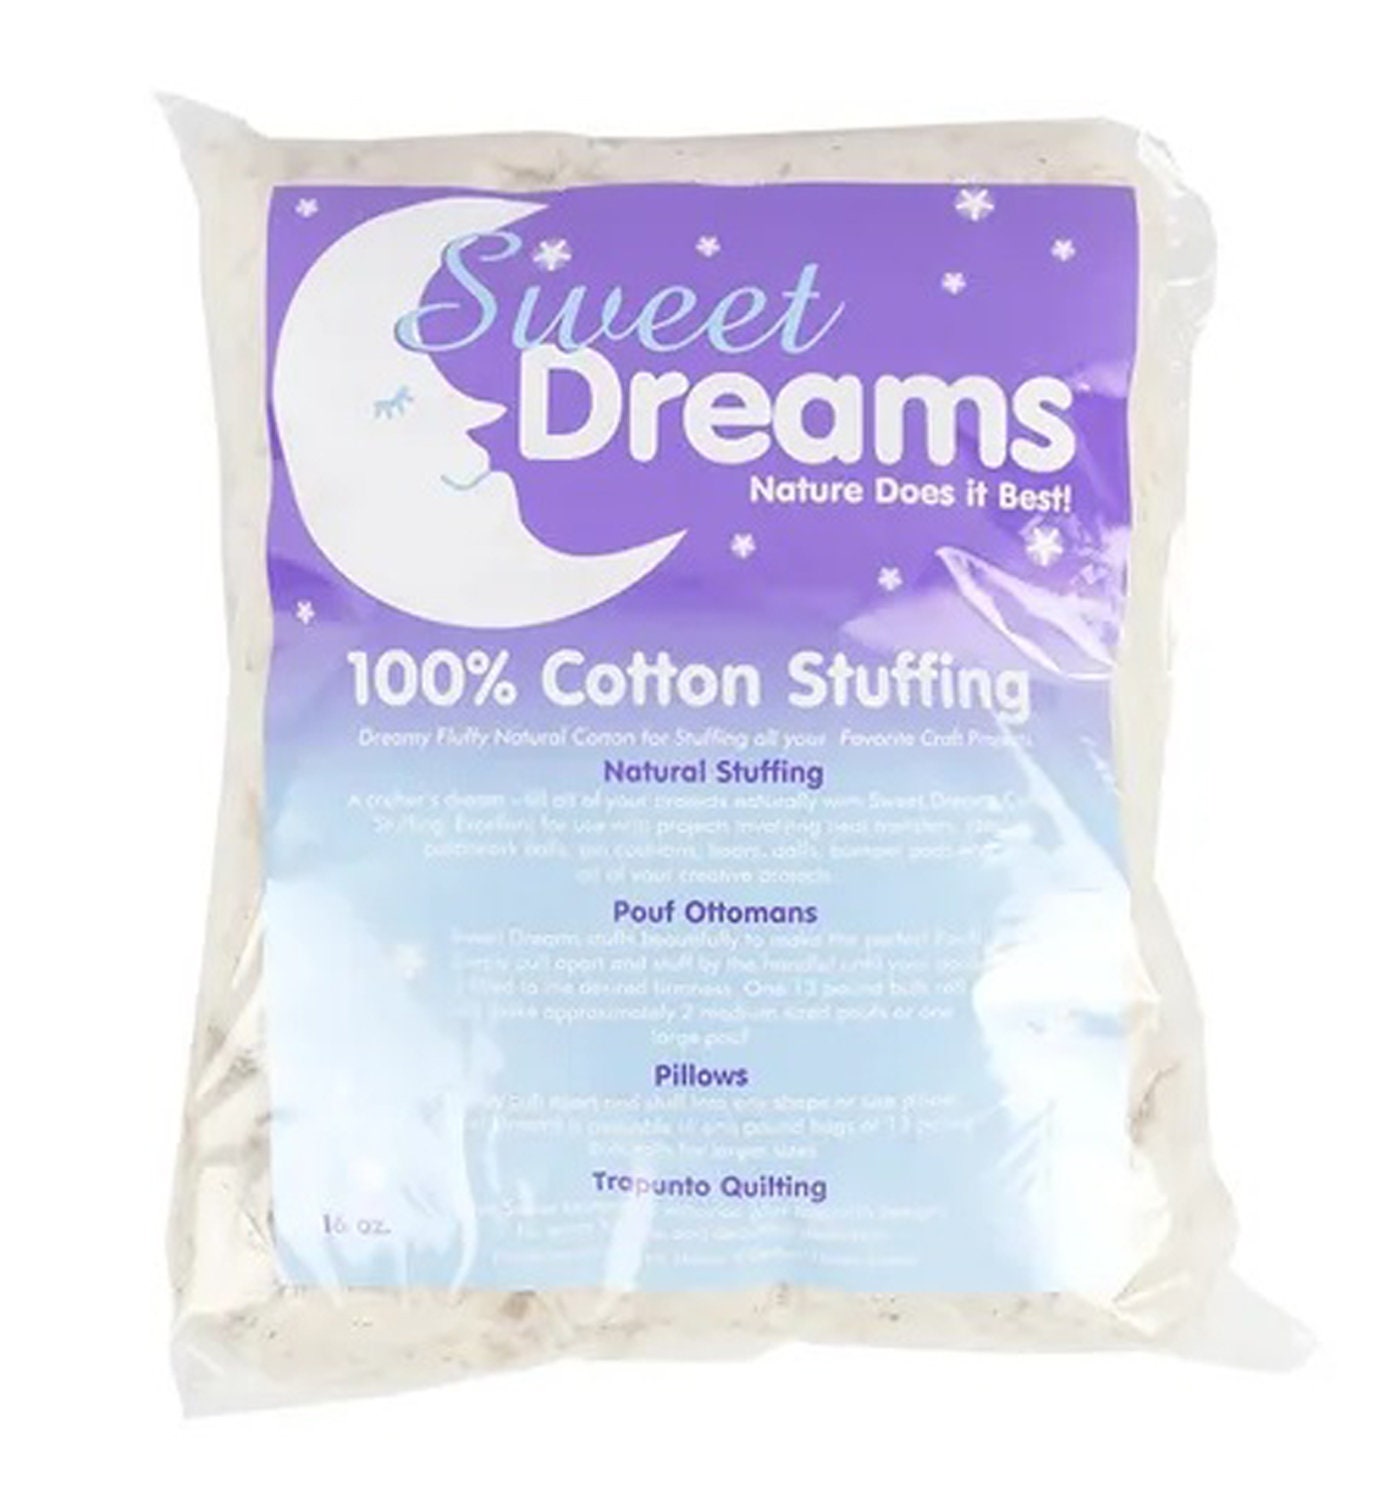  Berlune Organic Raw Cotton Stuffing Natural Cotton Fiber Batting  Cotton Filling for Pillow Upholstery Couch Dolls Art Crafts Stuffed Animals  Filler (White,1.1 lb) : Arts, Crafts & Sewing